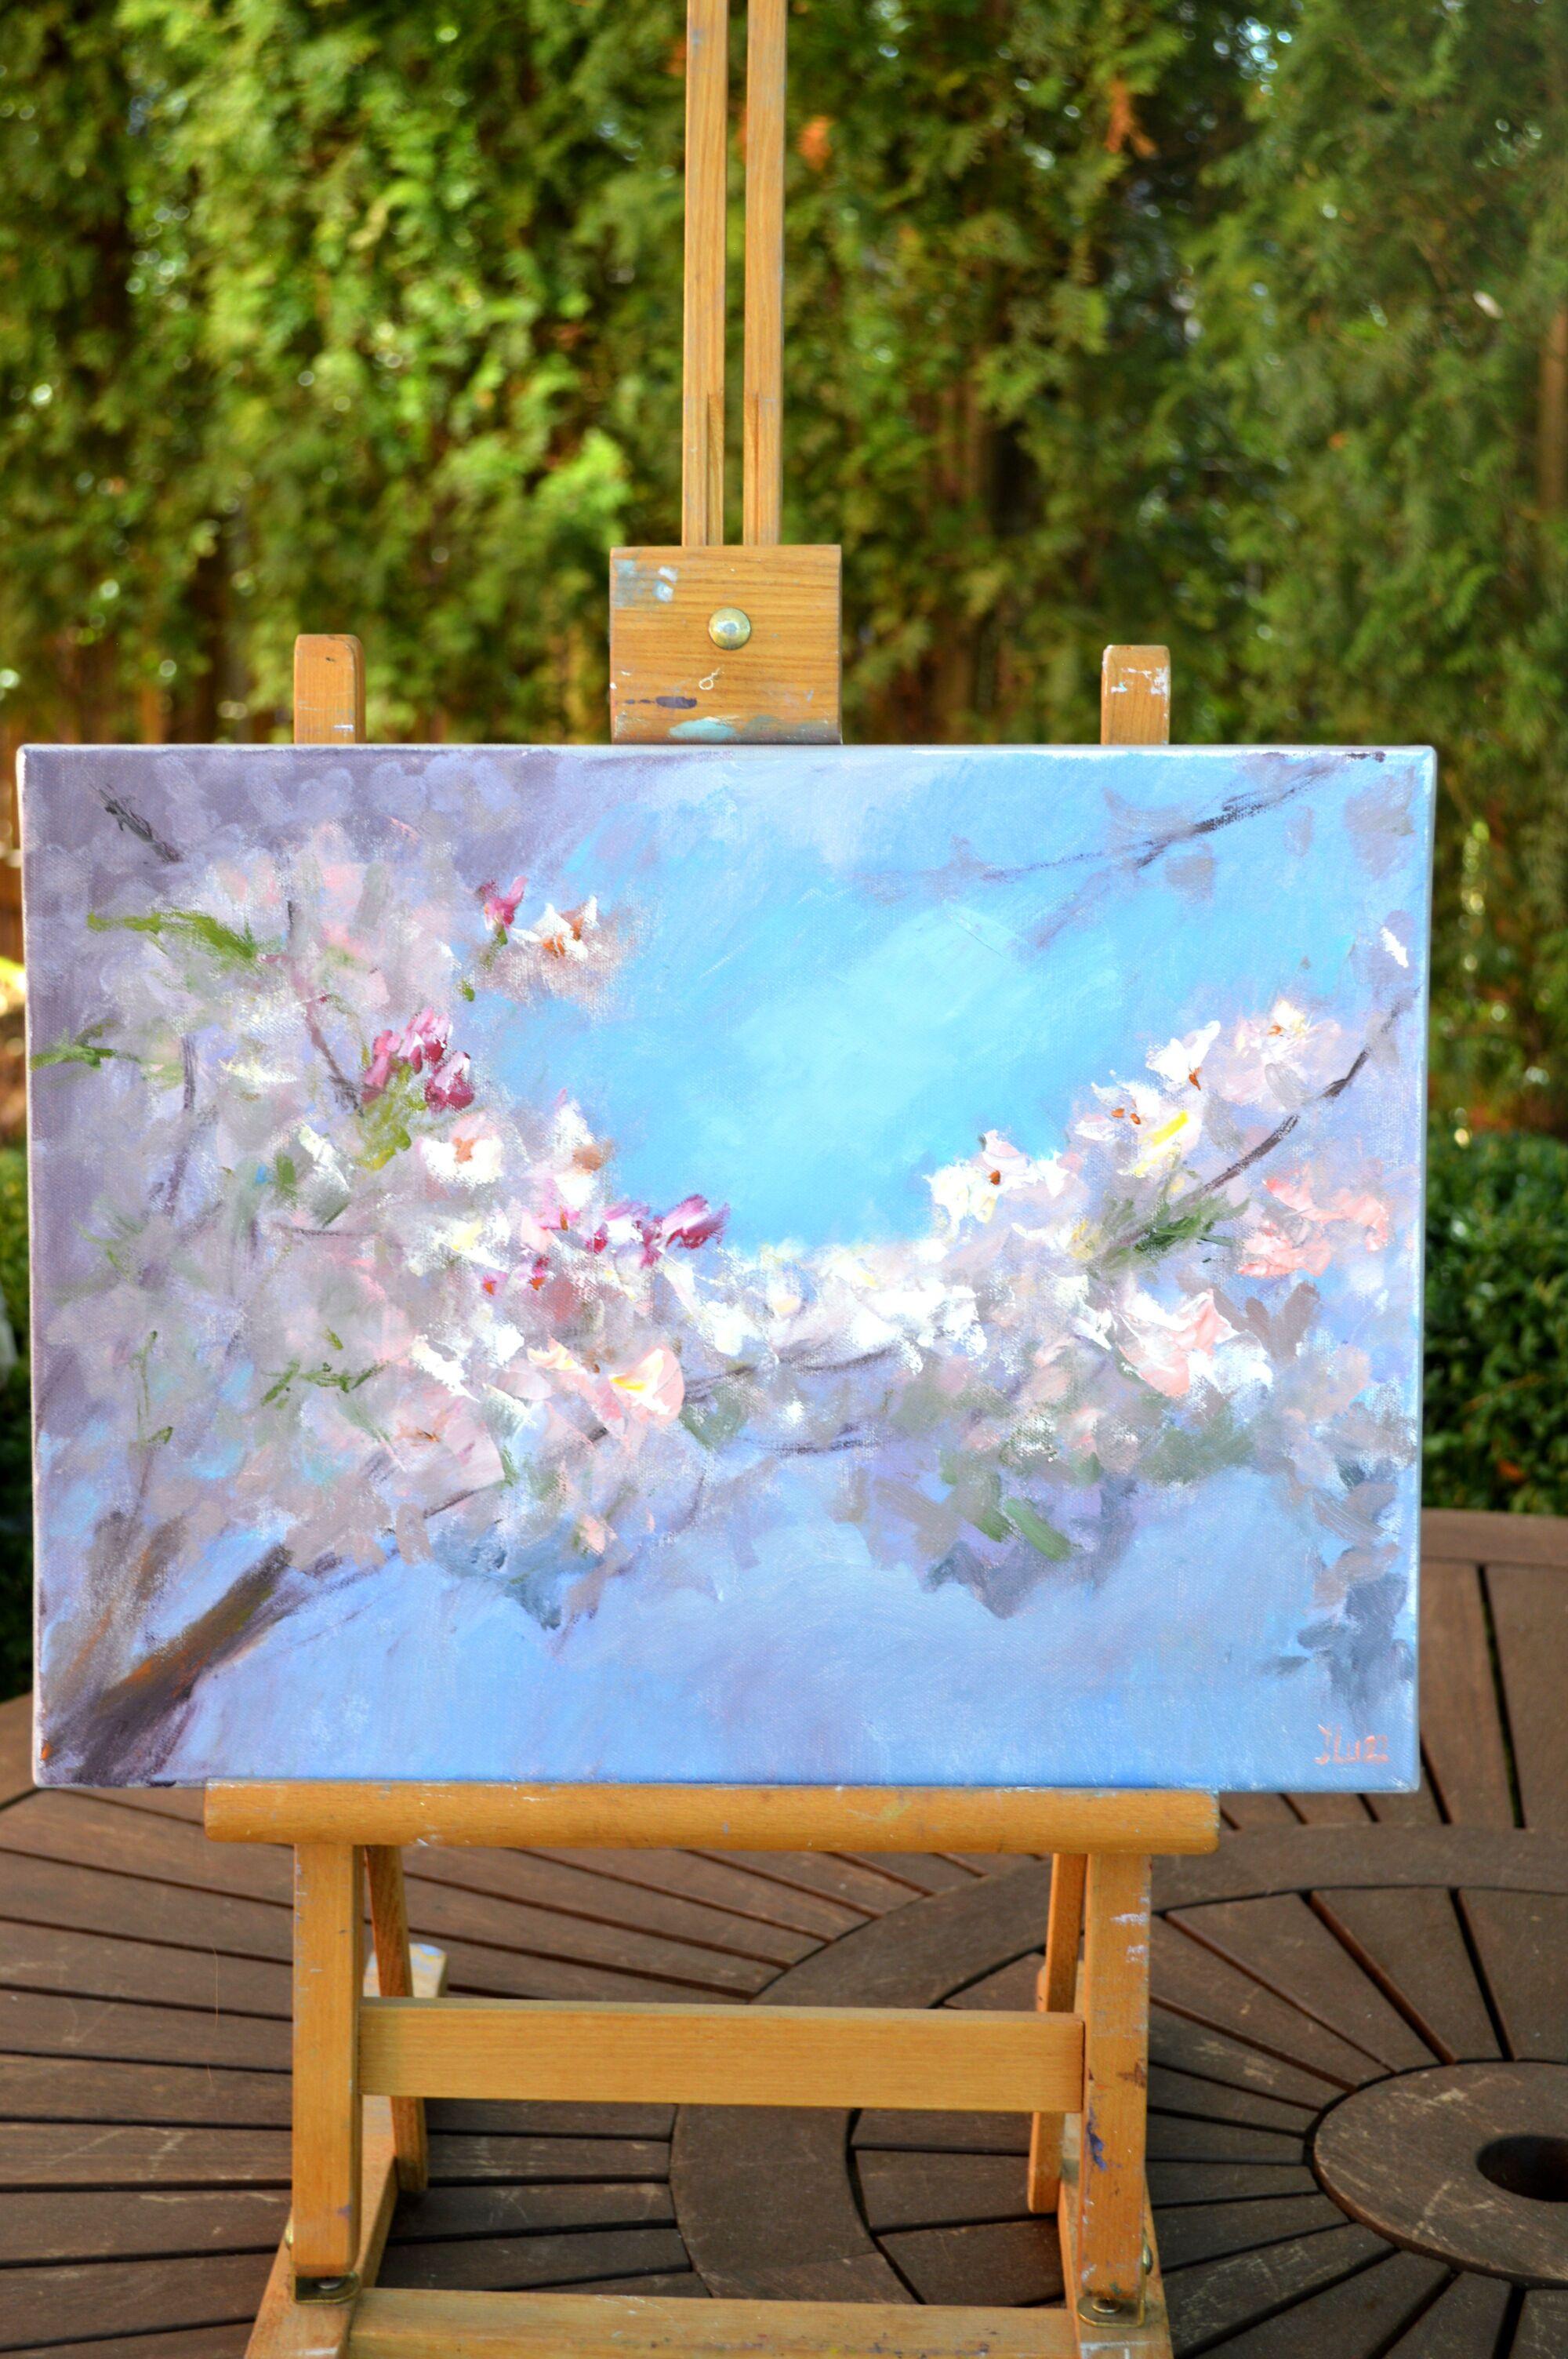 In creating this piece, I surrendered to the dance of colors and textures, letting oil become emotion on canvas. Each brushstroke captures the trembling beauty of nature's fleeting moments. Merging impressionist touches with realism's grounding, I